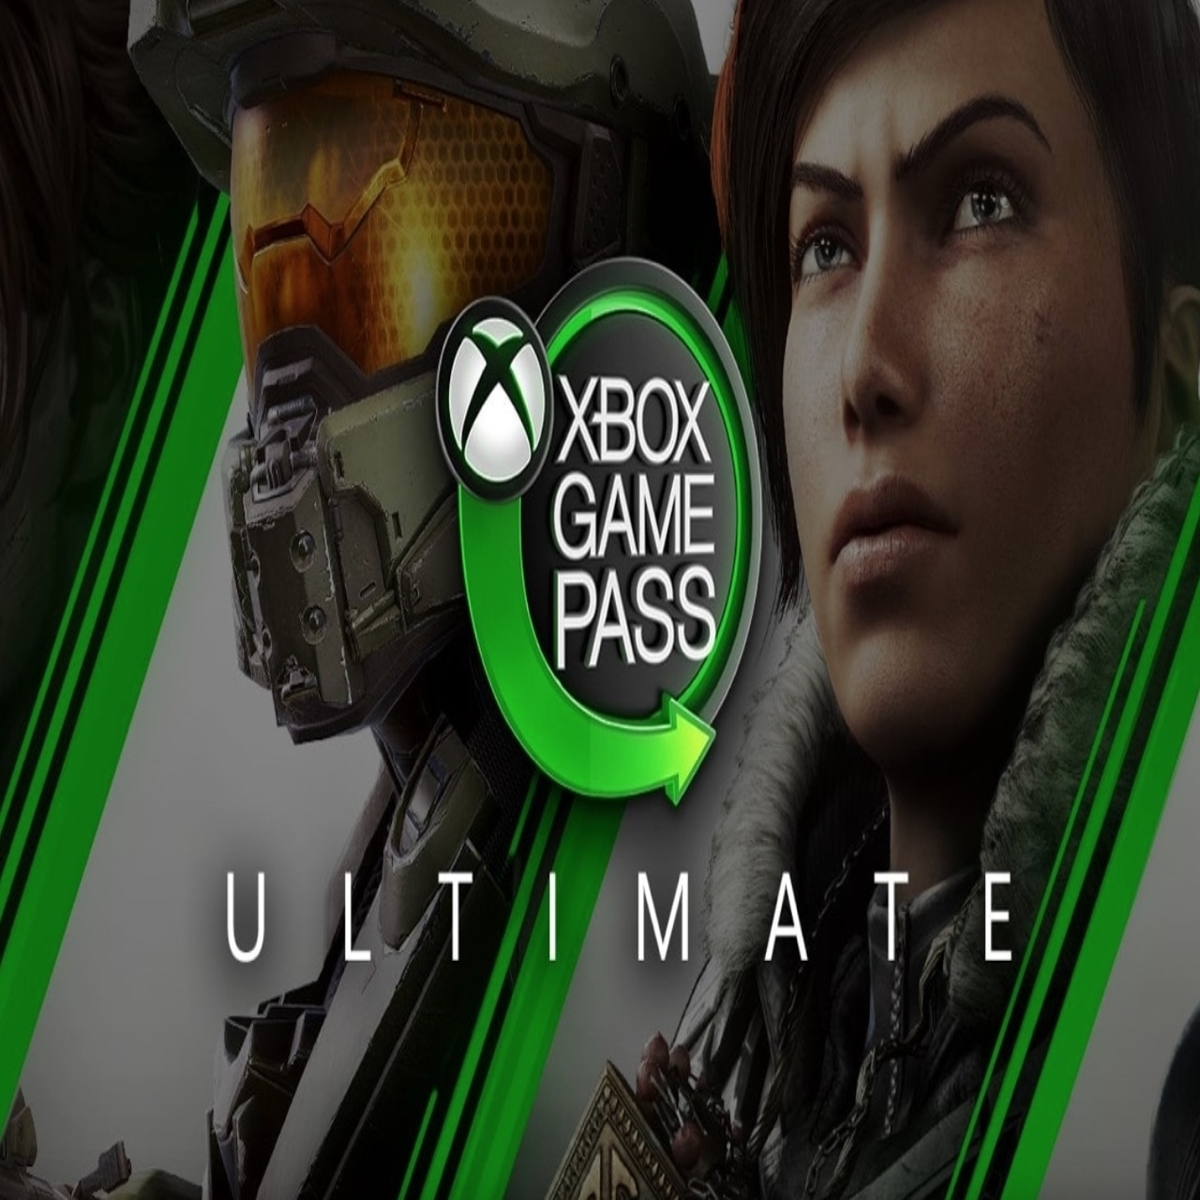 Xbox Cloud Gaming is available to all Xbox Game Pass Ultimate